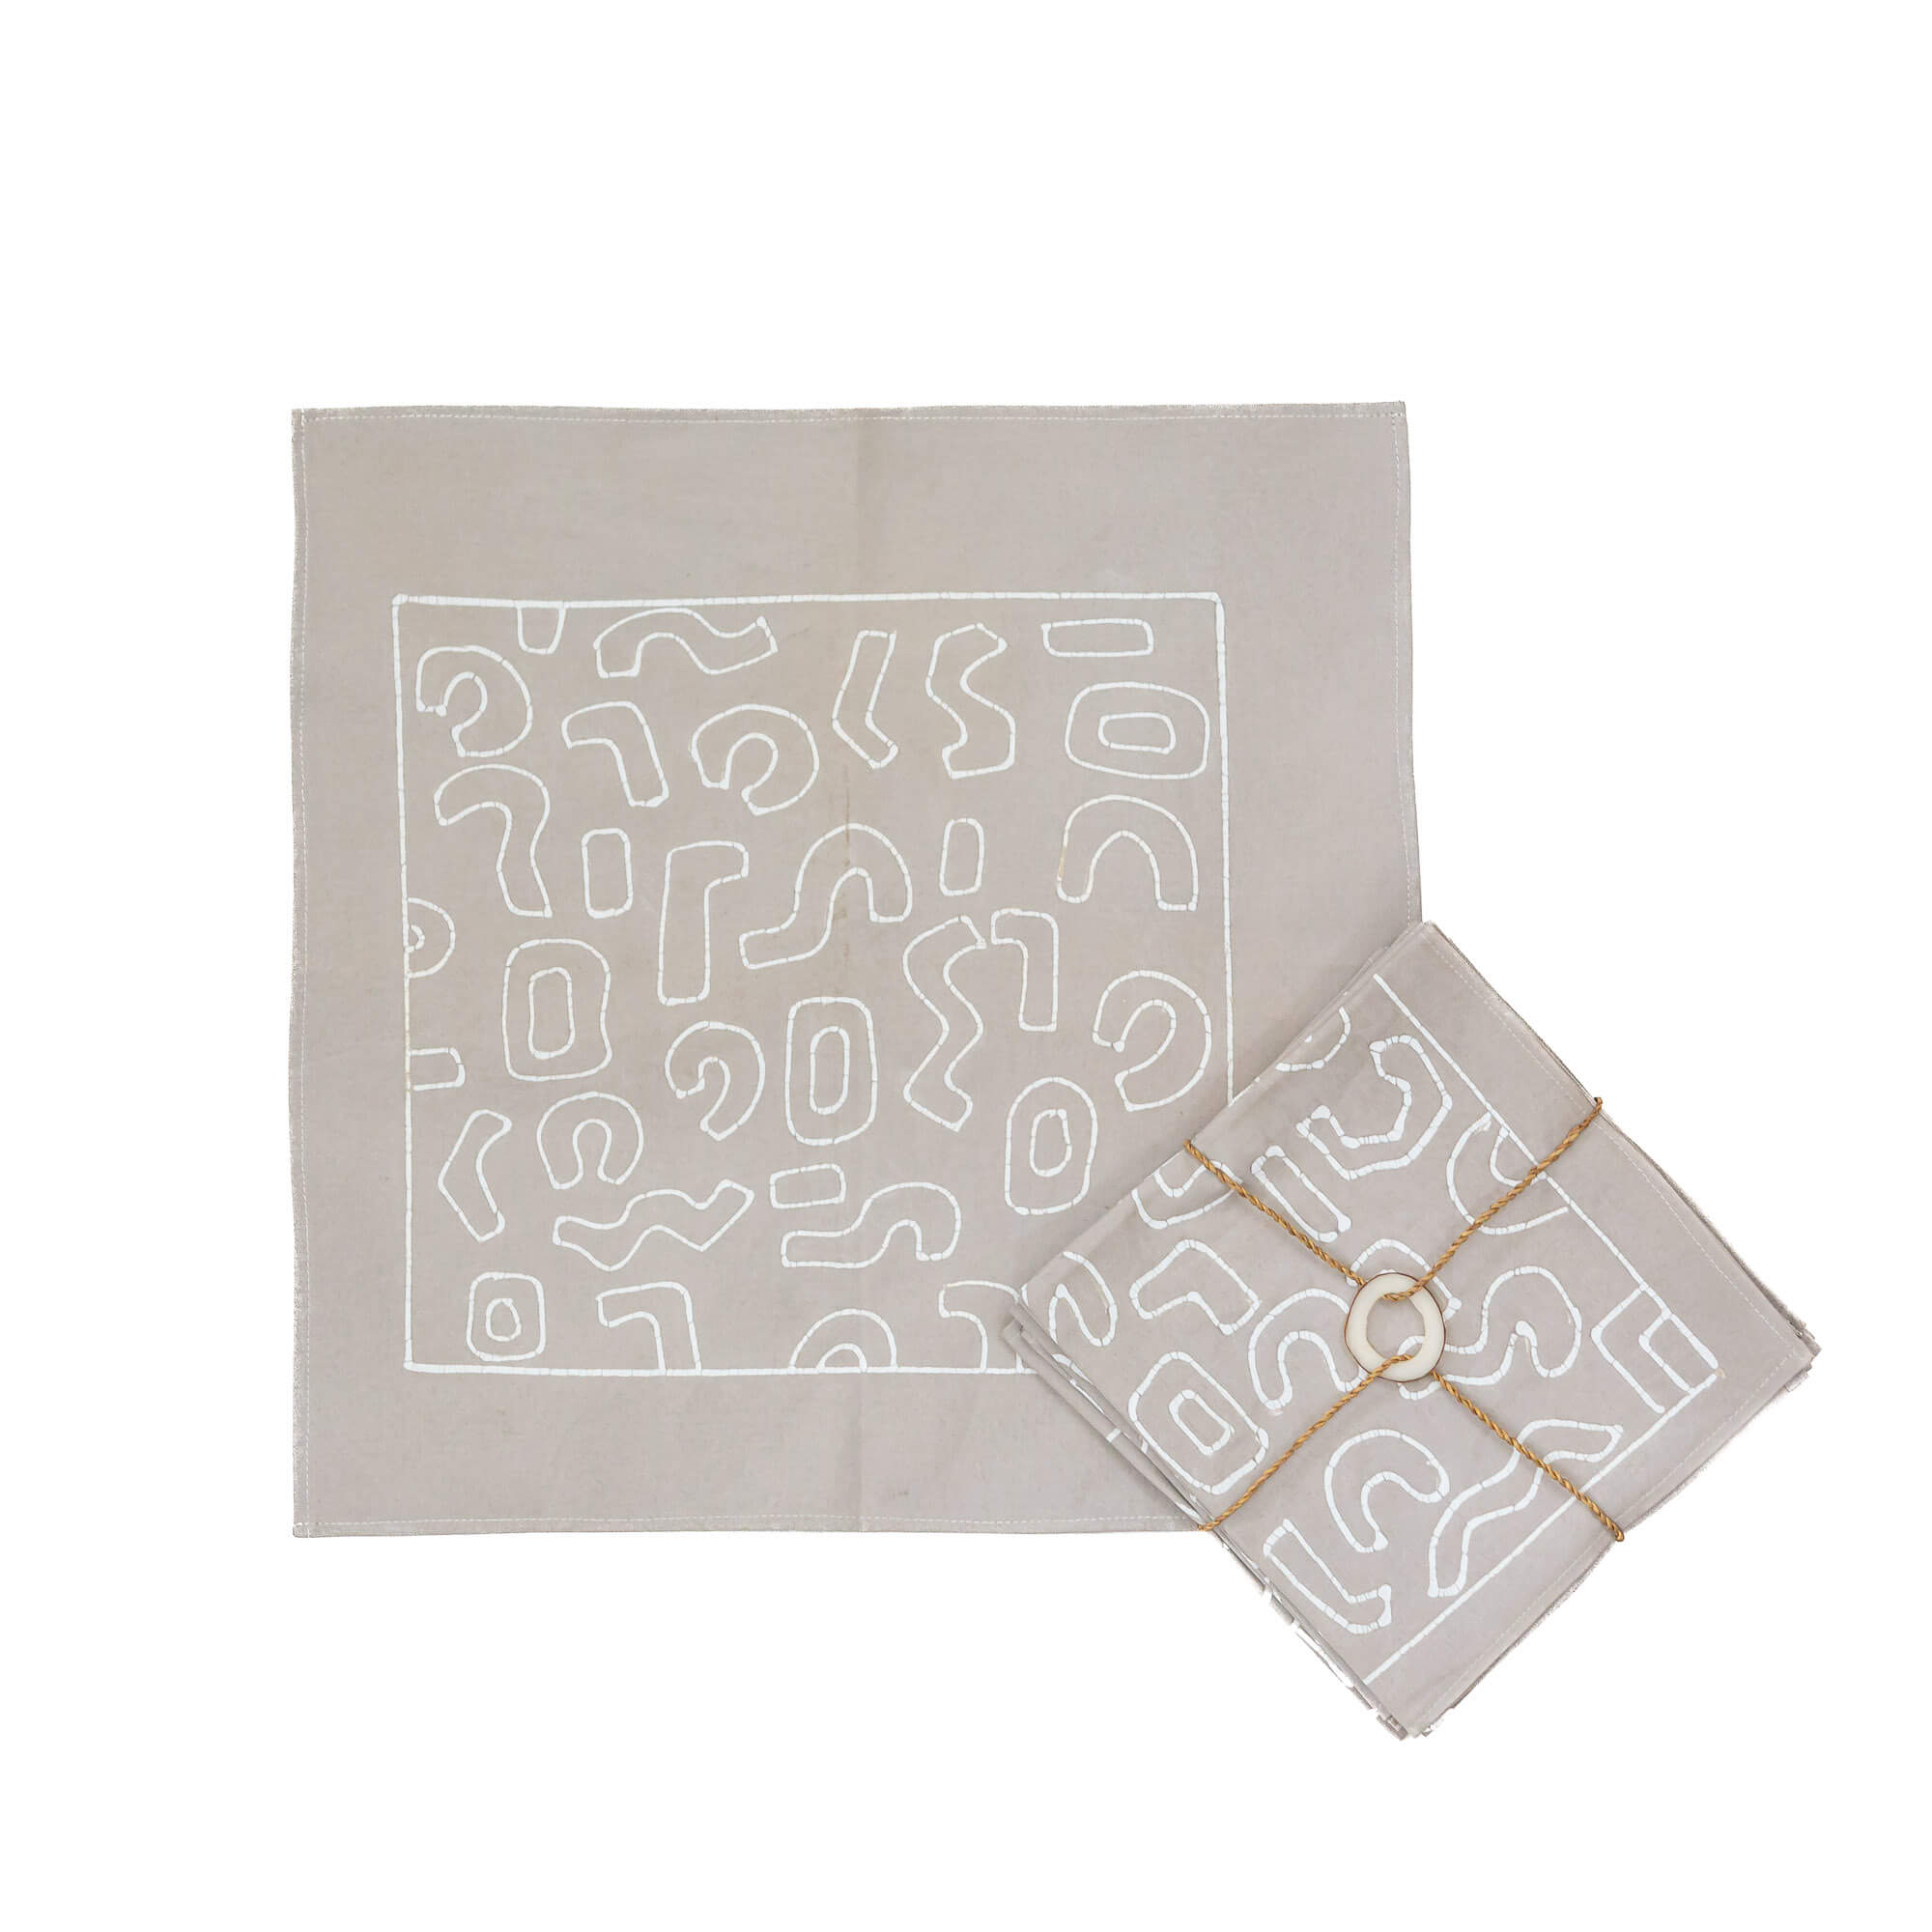 Kuba Light Taupe Outline Napkin Set - Handmade by TRIBAL TEXTILES - Handcrafted Home Decor Interiors - African Made